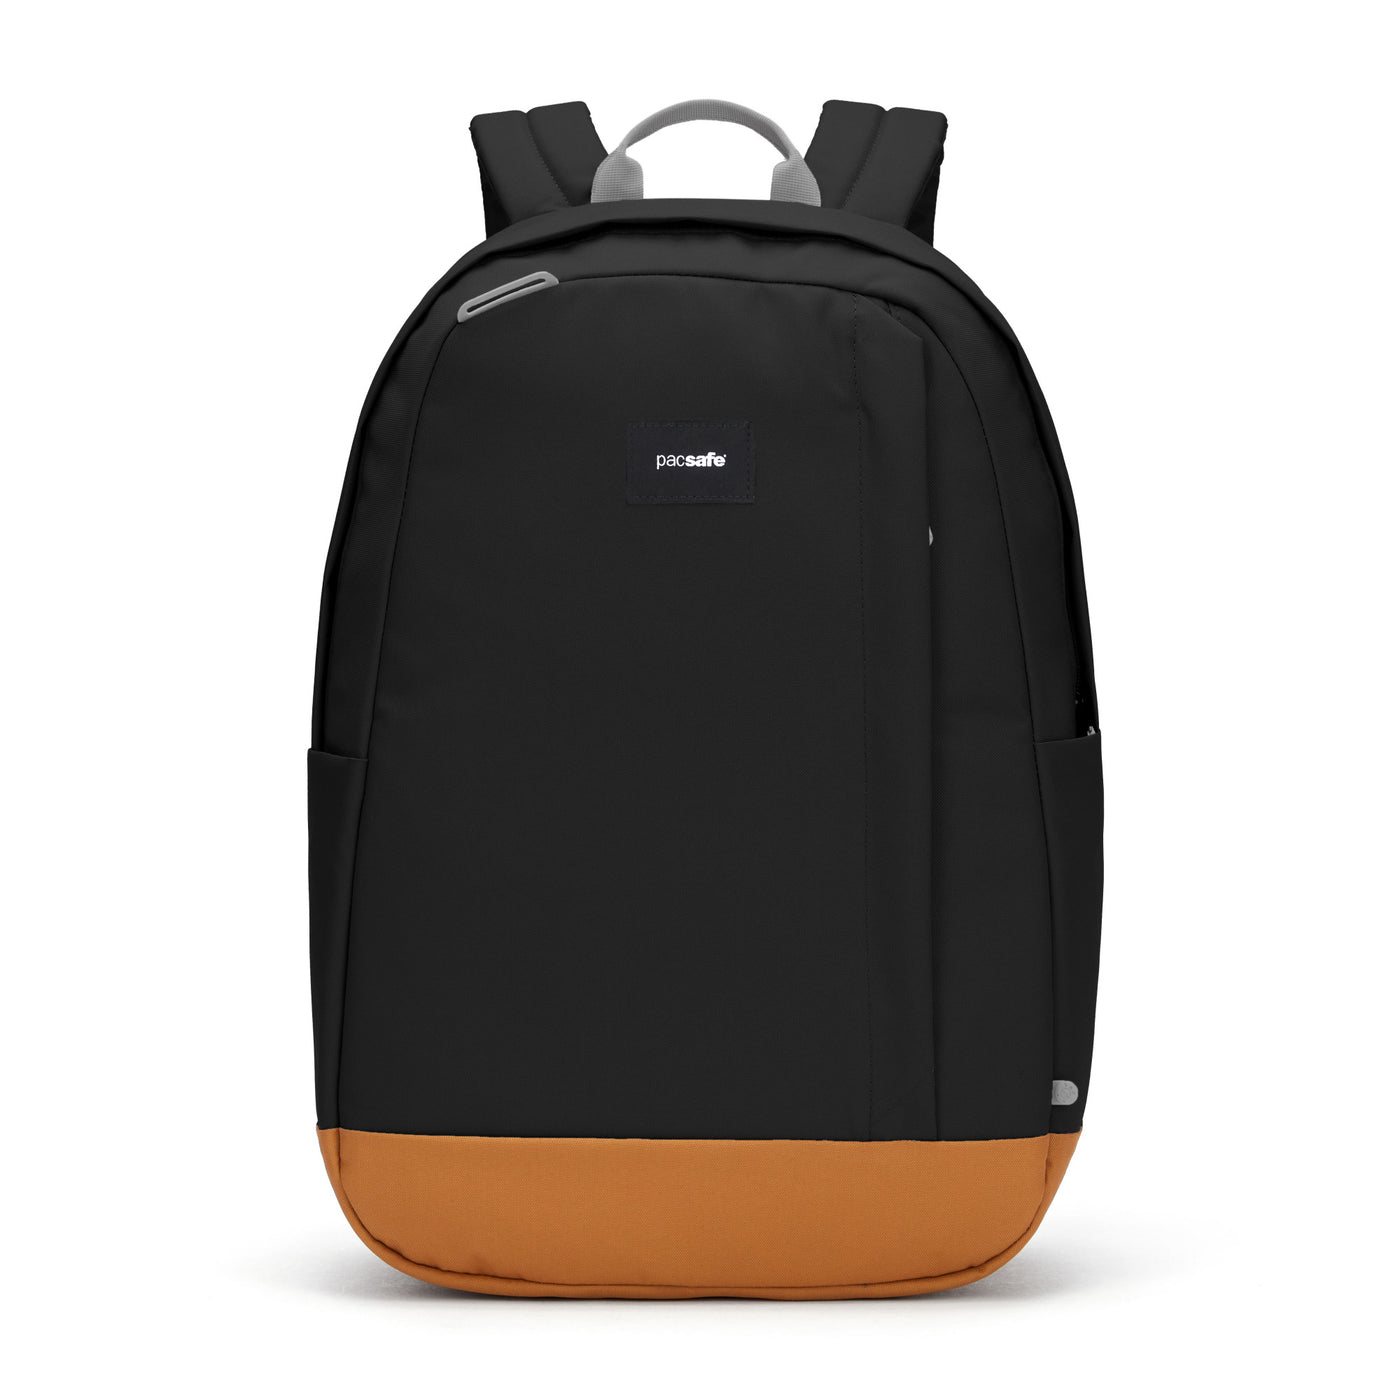 PacsafeGO 25L Backpack